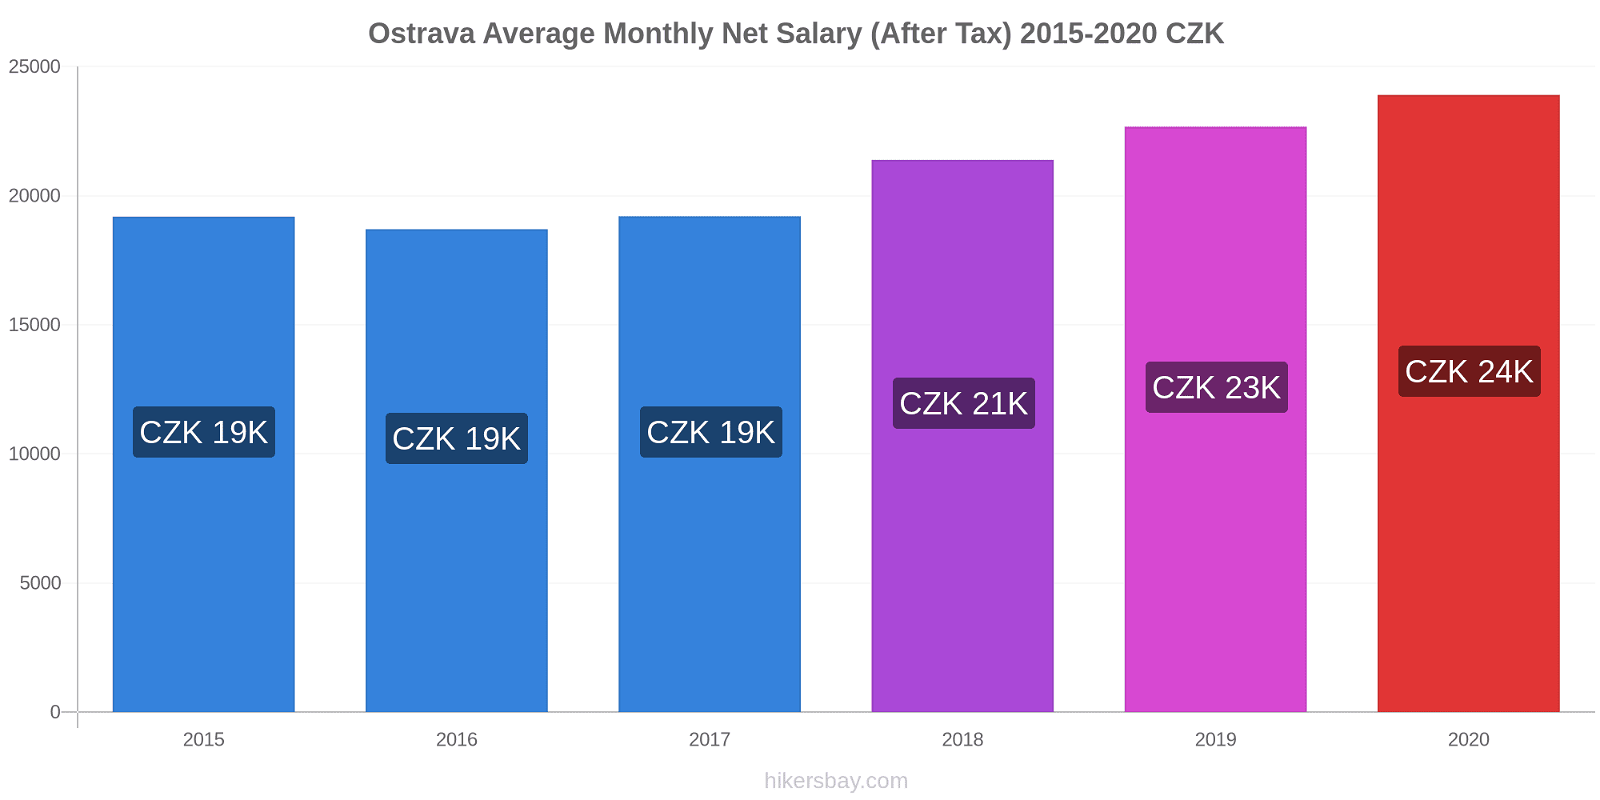 Ostrava price changes Average Monthly Net Salary (After Tax) hikersbay.com